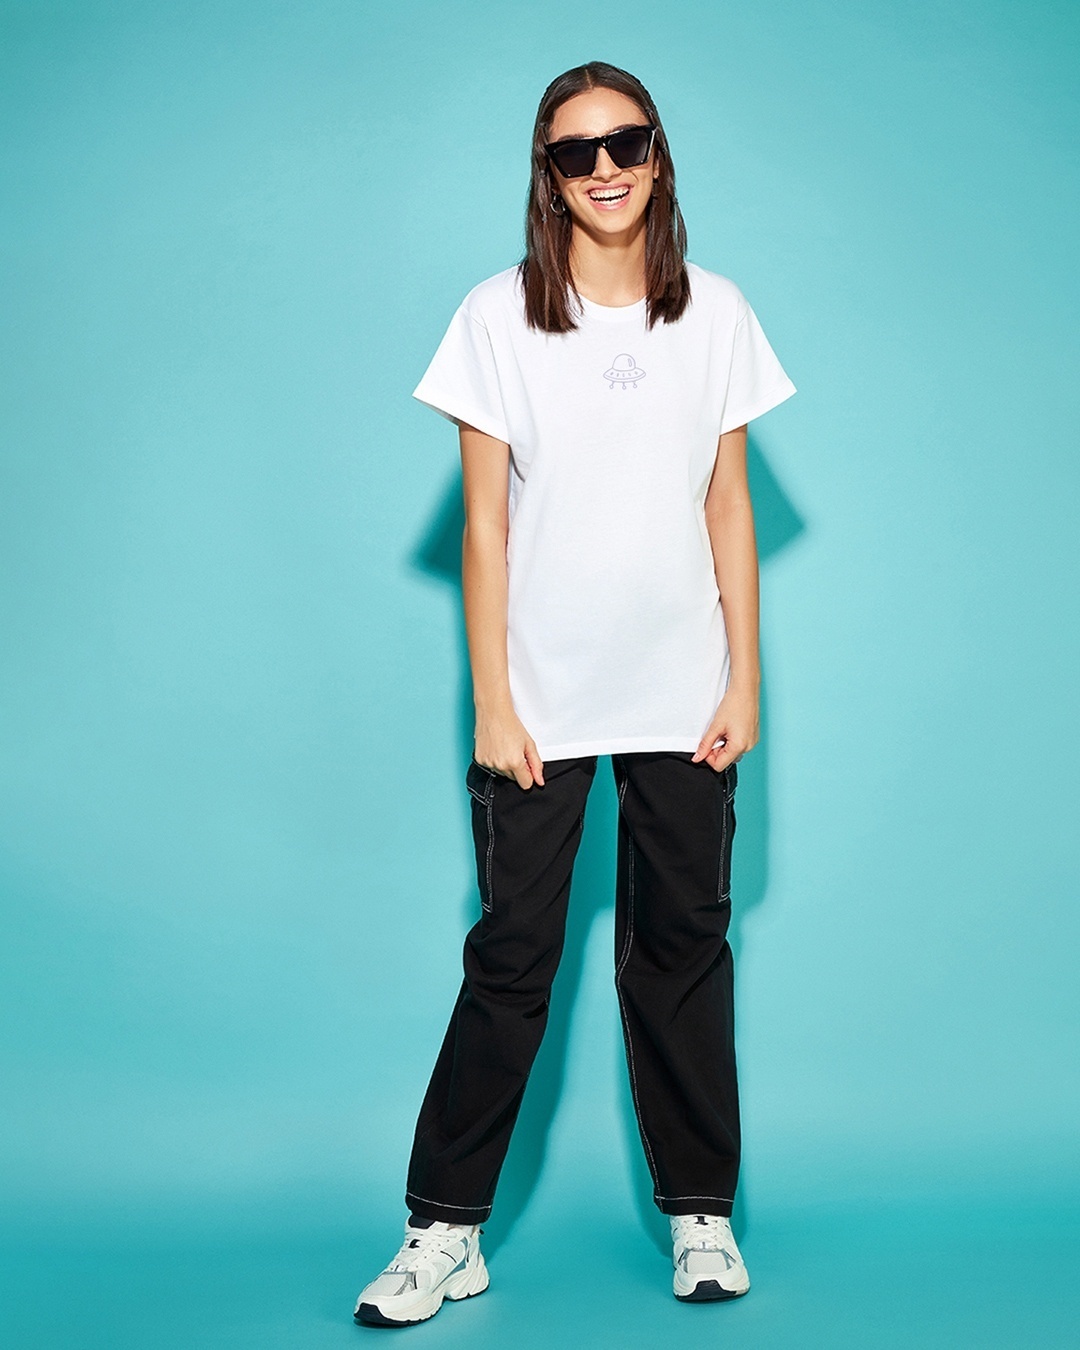 Women's White Space Graphic Printed Boyfriend T-shirt paired with colorful sneakers